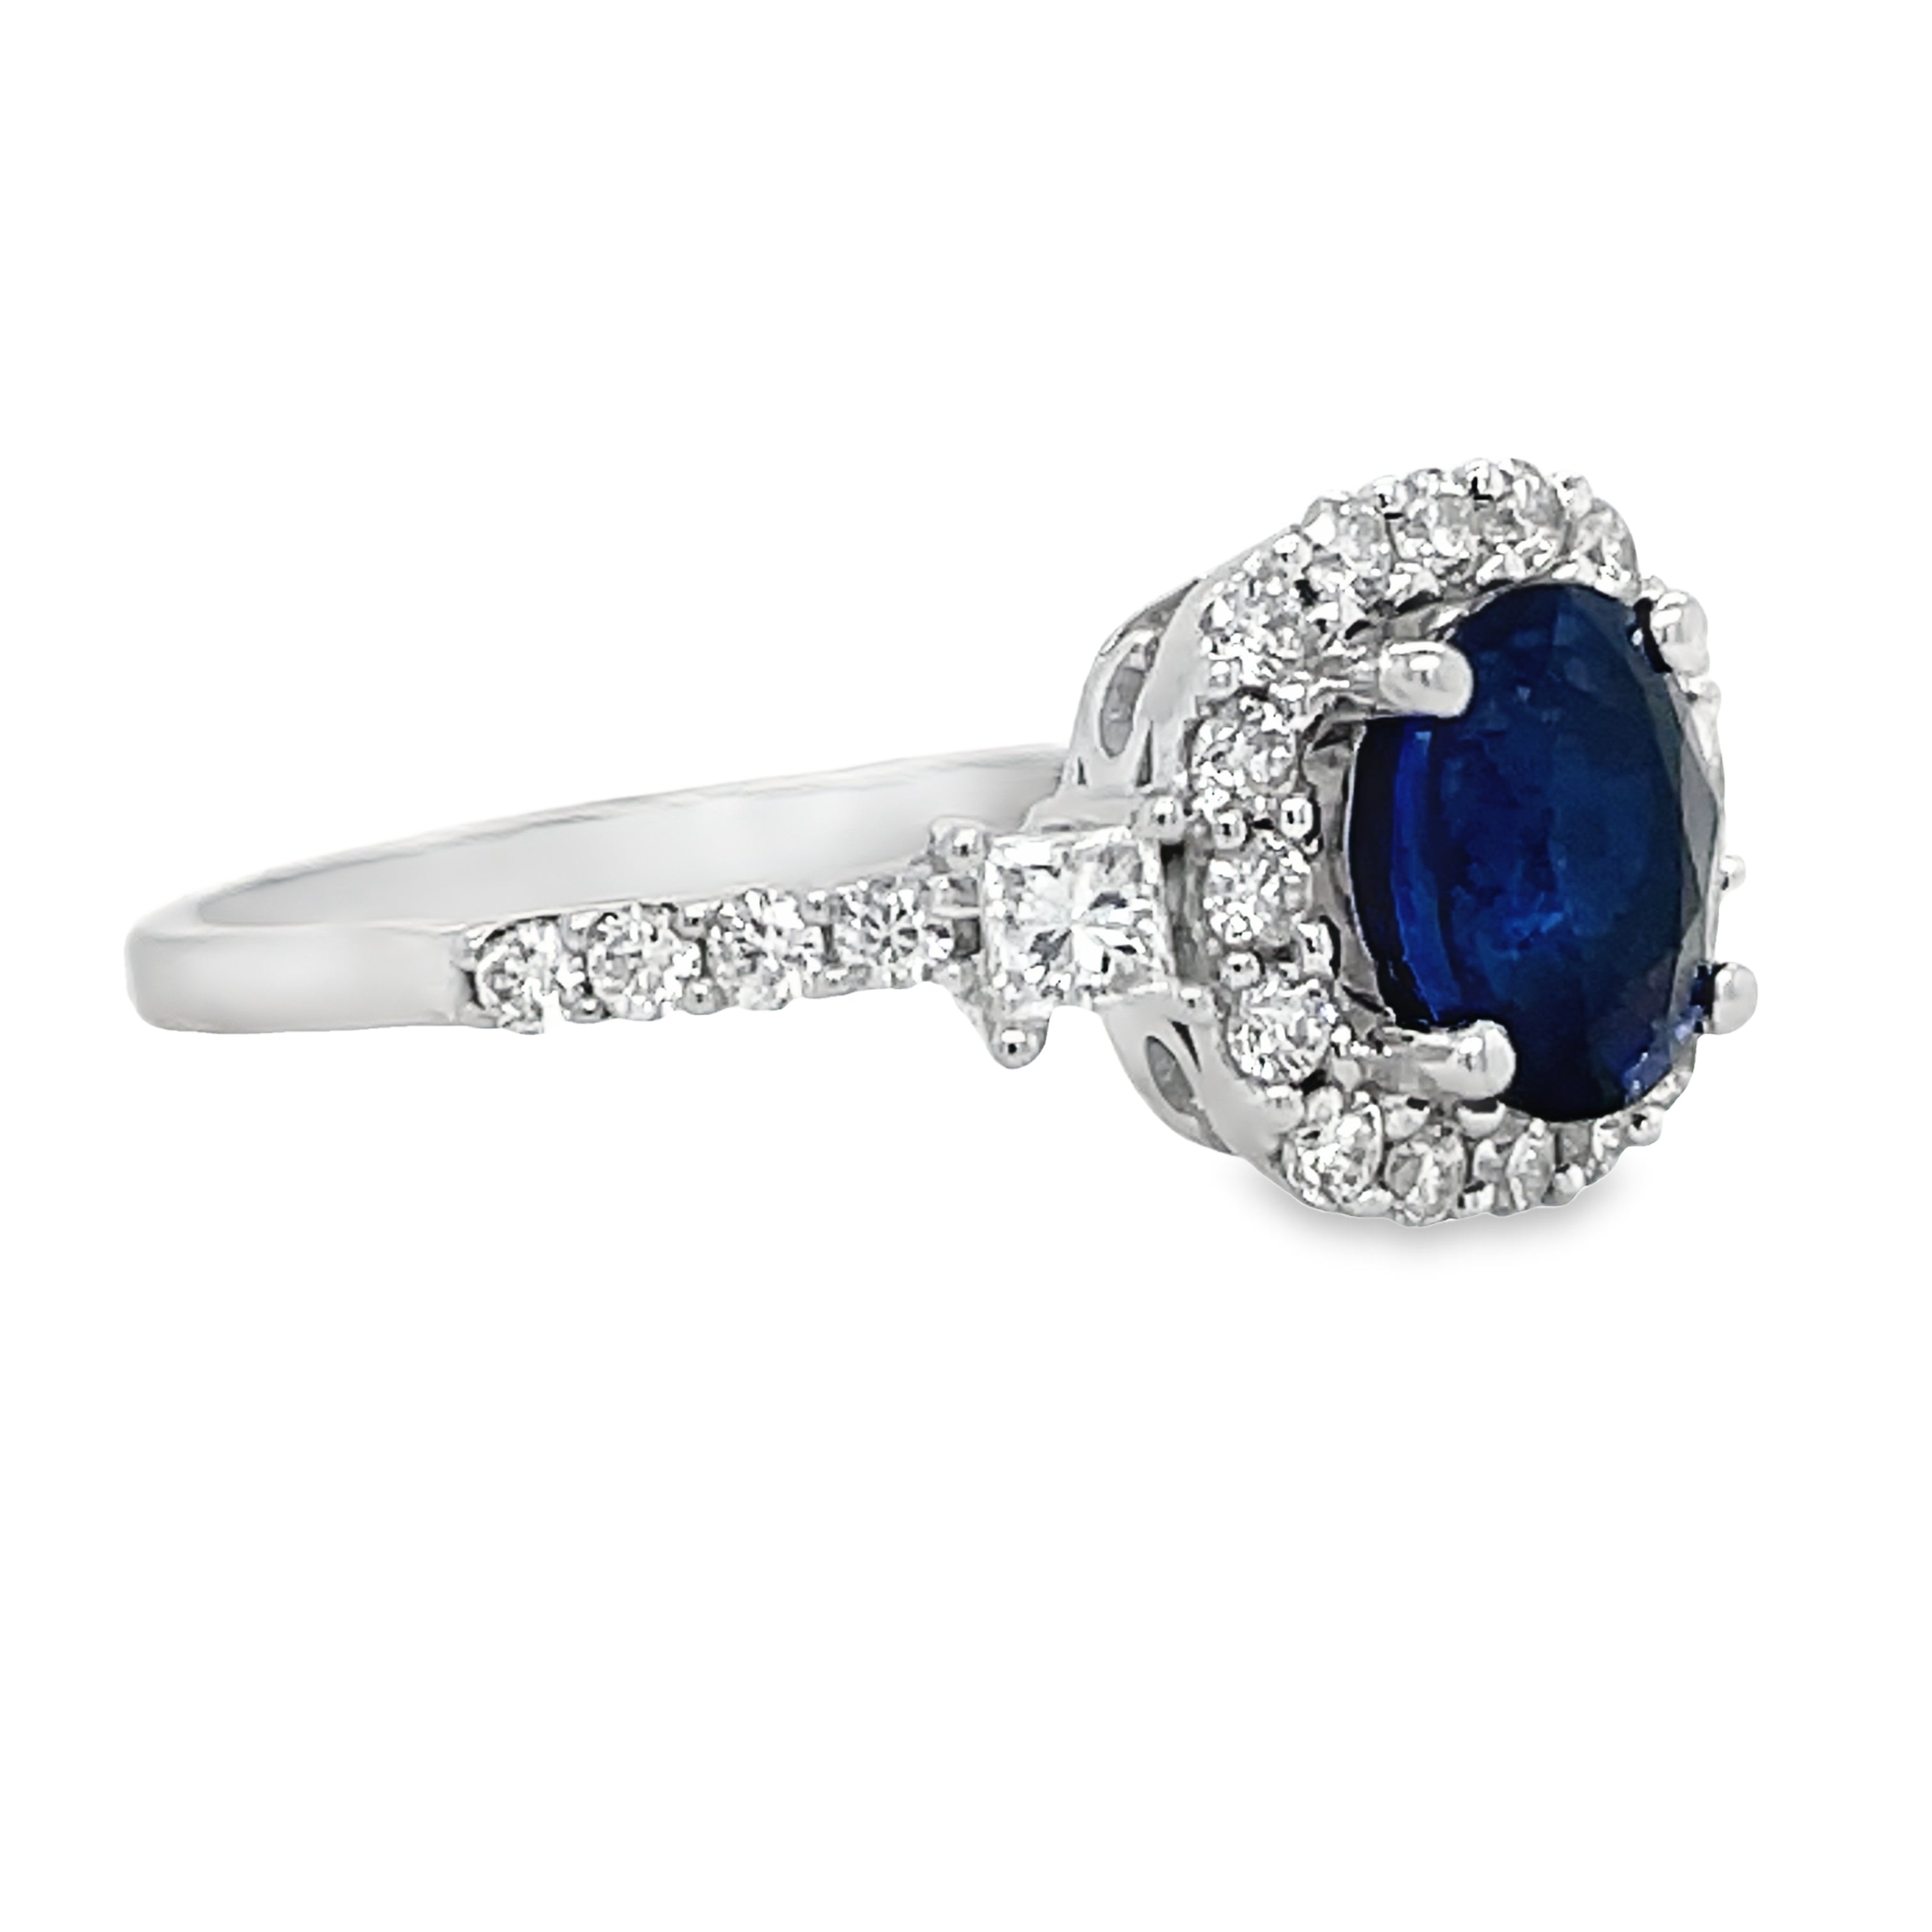 Experience luxury and elegance with our Oval Sapphire Diamond Bezel Ring. Featuring a stunning oval sapphire surrounded by princess cut and round diamonds totaling 0.59 cts, all set in a beautiful diamond bezel on an 18k white gold band. Make a statement that exudes sophistication and style.